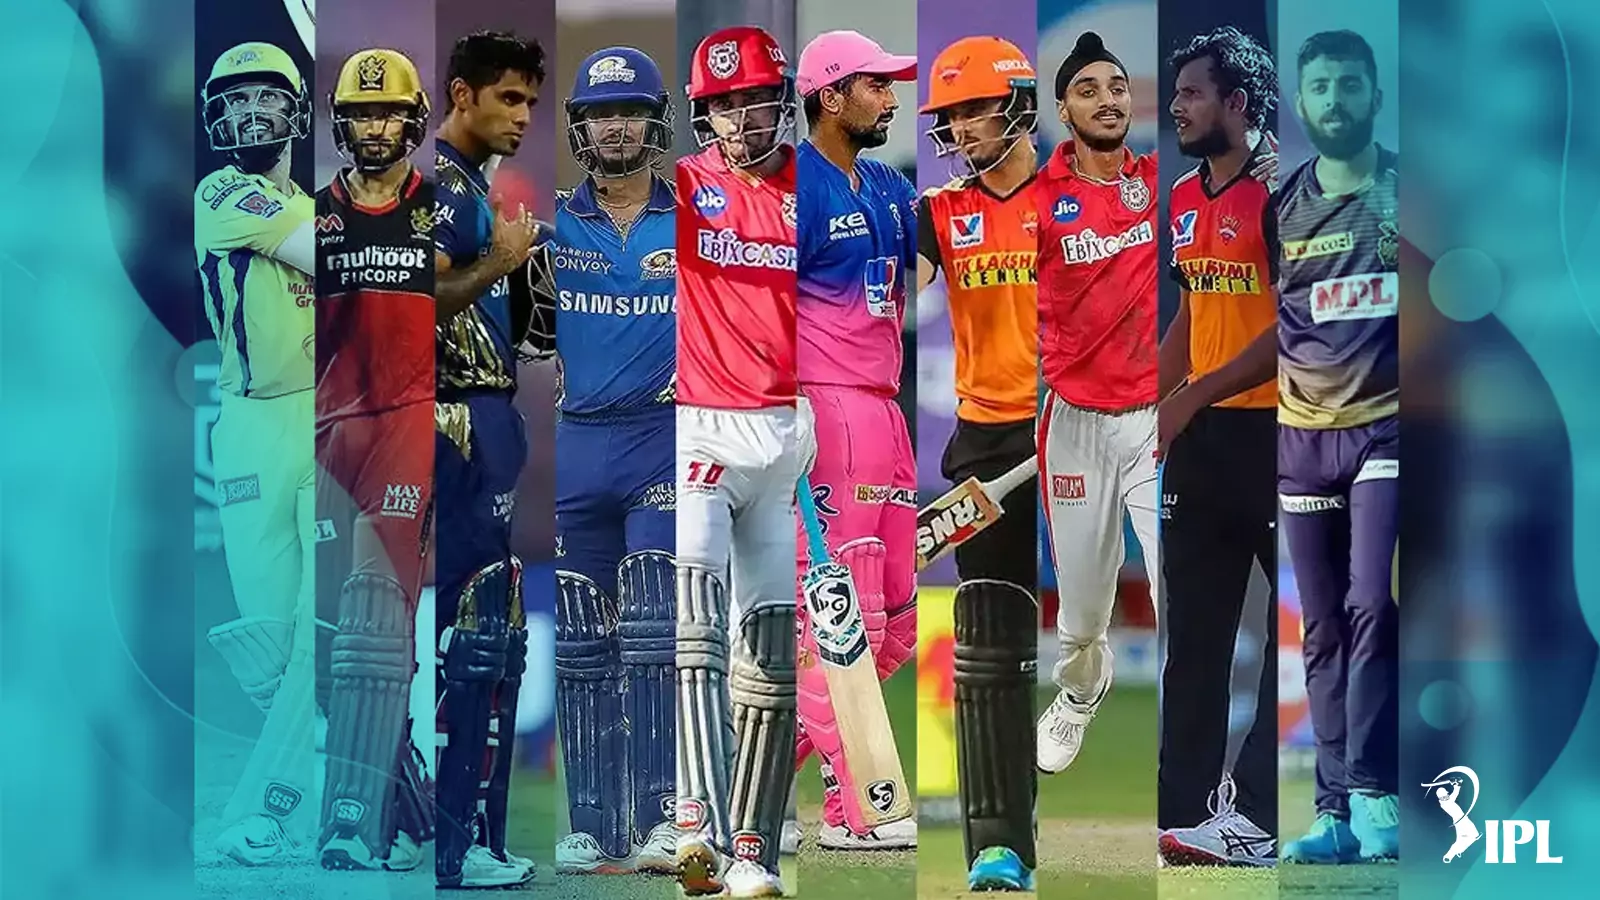 Learn more about IPL cricket teams at our website before starting to bet on them.